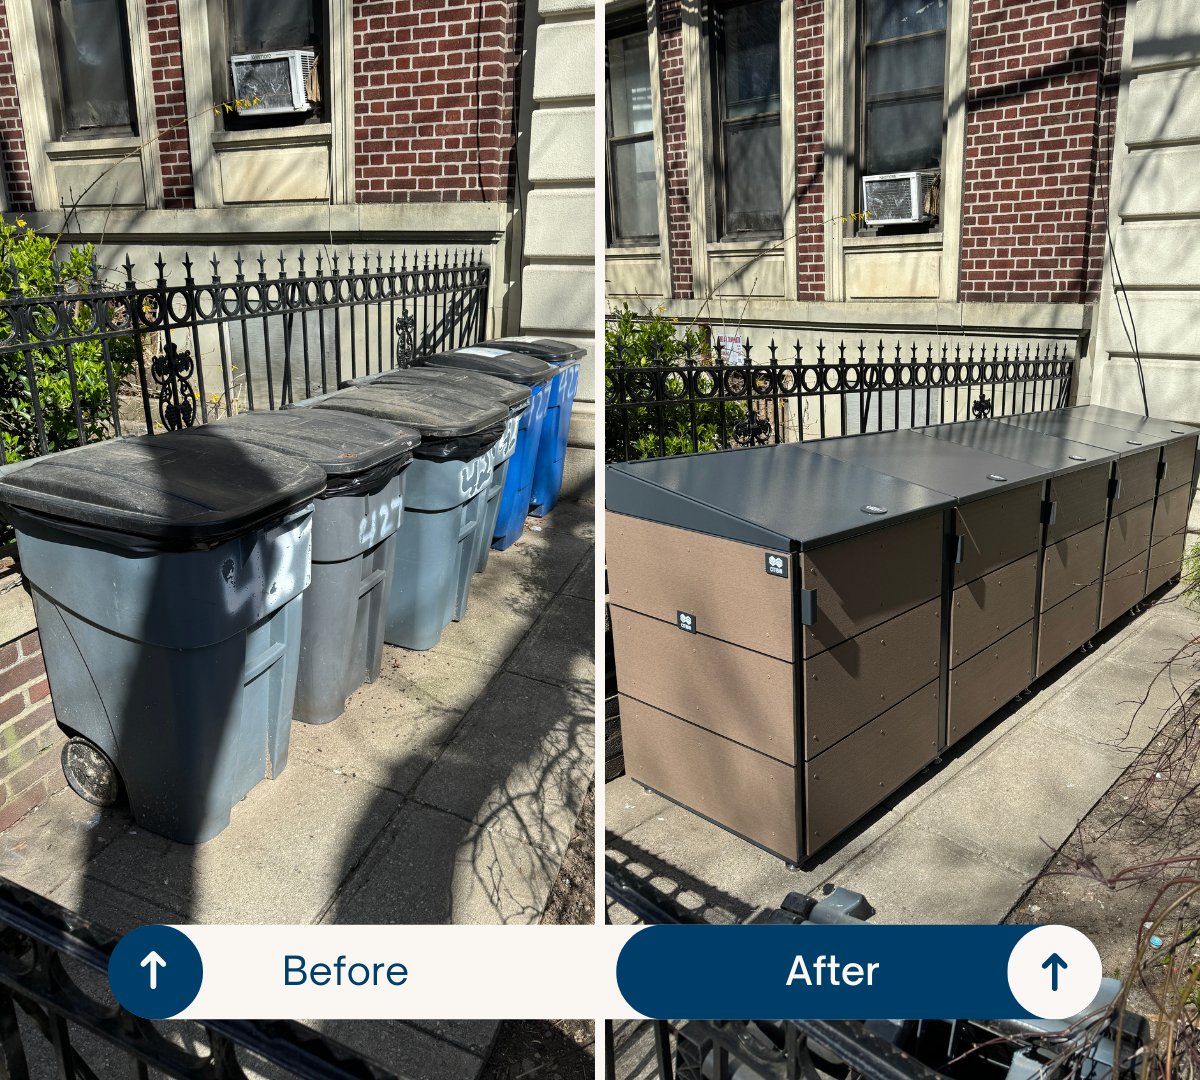 #TransformationThursday! This 5-module Coffee in Standard size replaced these unsightly plastic trash cans. 
No more eyesore and, most importantly, no more rats in the trash.❌🐀 citibin.com
#citibin #ratshatecitibin #smallbusiness